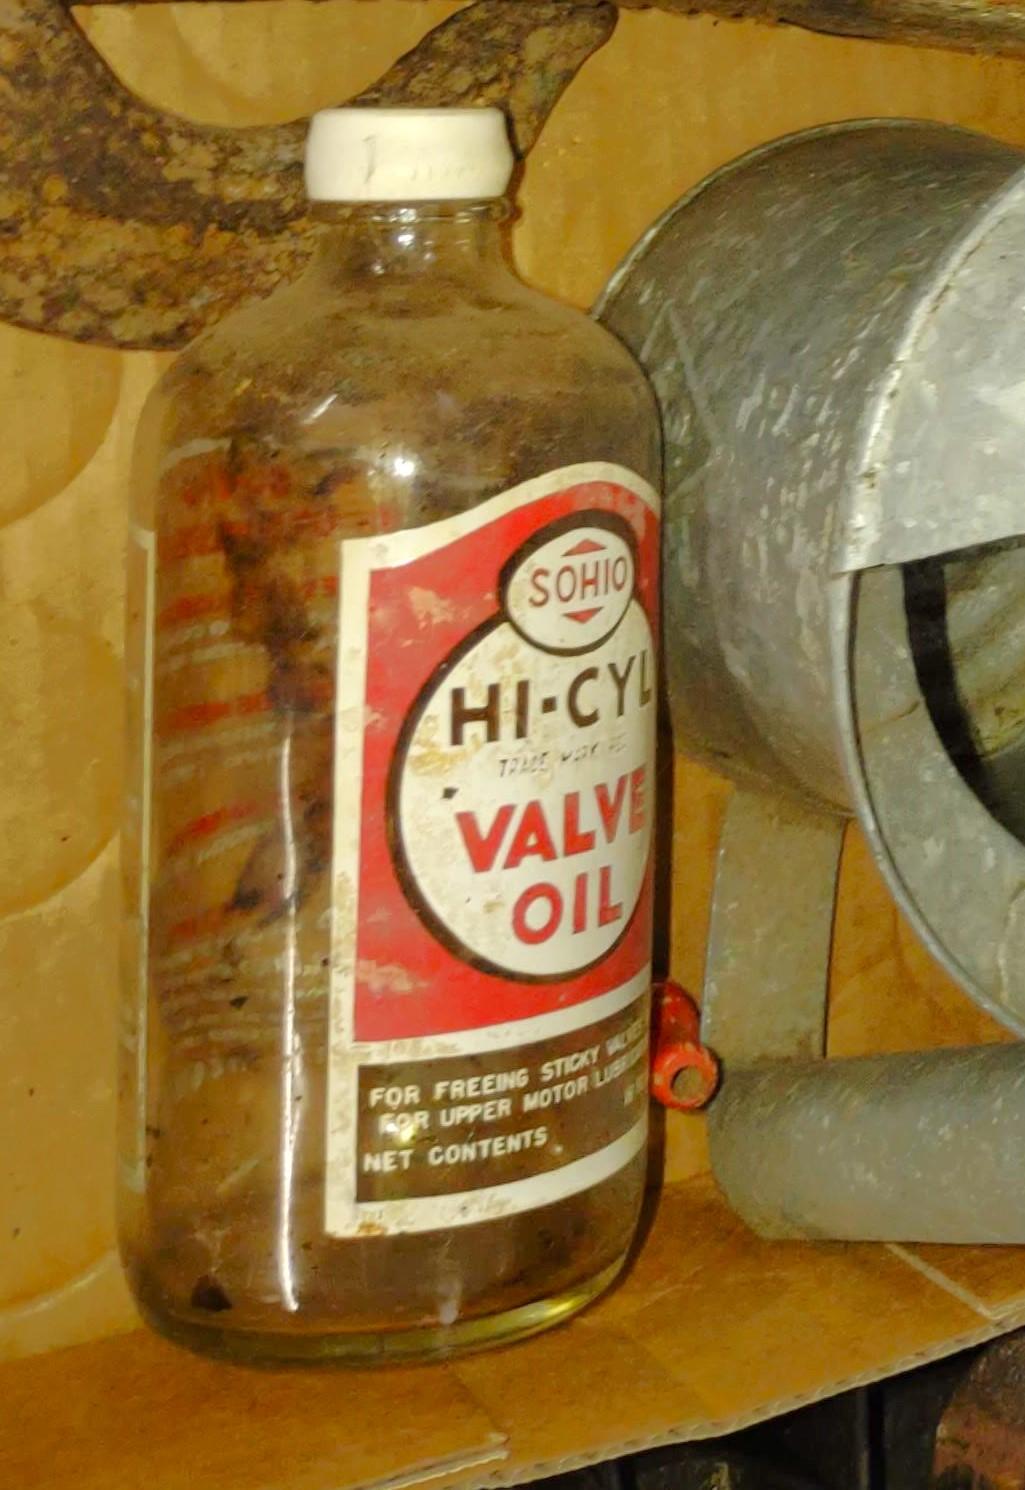 SOHIO HI-CYCLE VALVE OIL BOTTLE, OIL CAN, GRIP CABLE, WOOD SPLITTING WEDGE, ETC - PICK UP ONLY